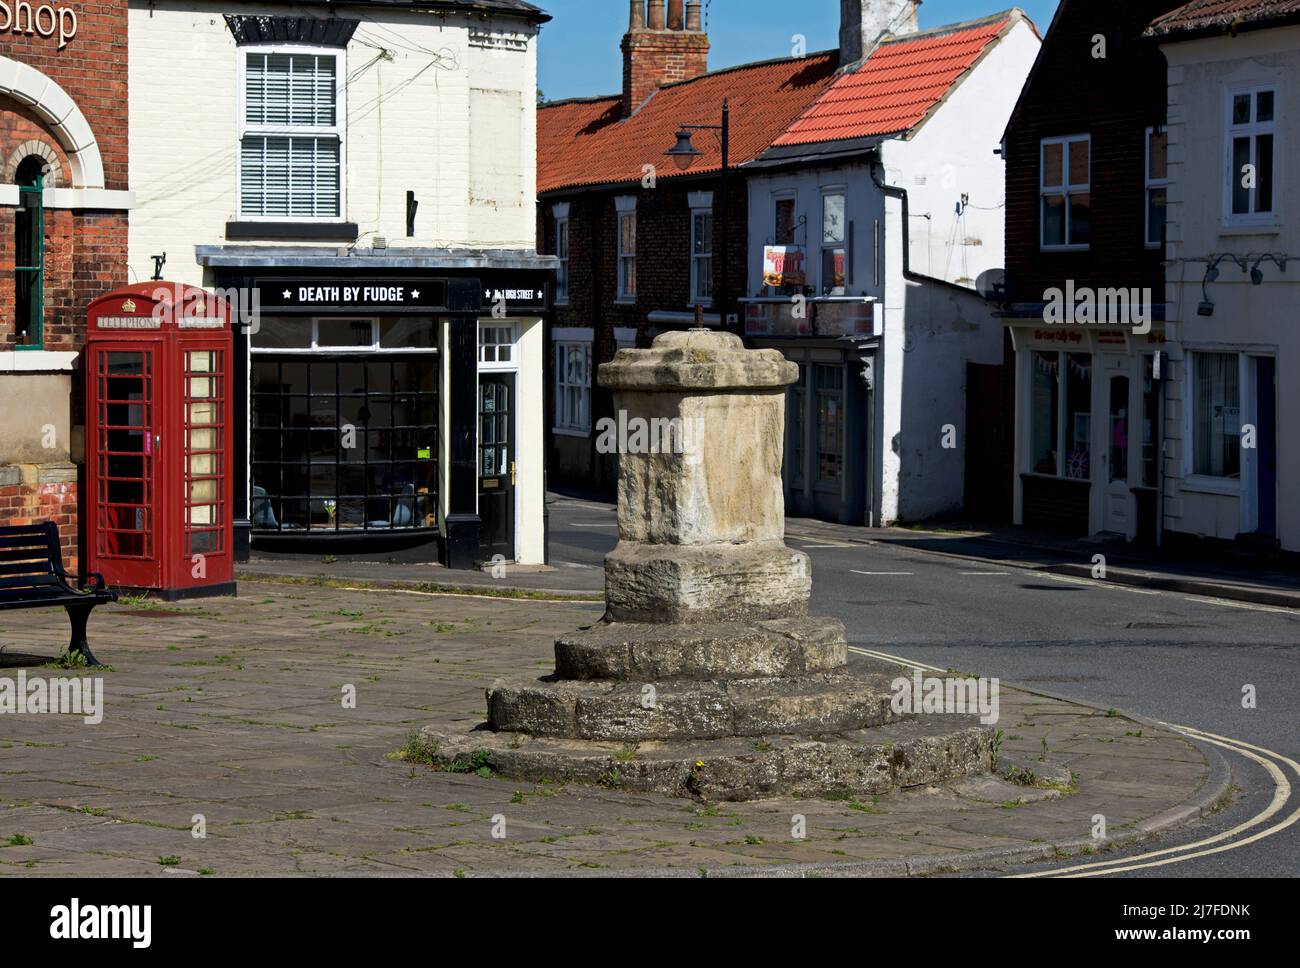 The old market cross, Epworth, North Lincolnshire, England UK Stock Photo